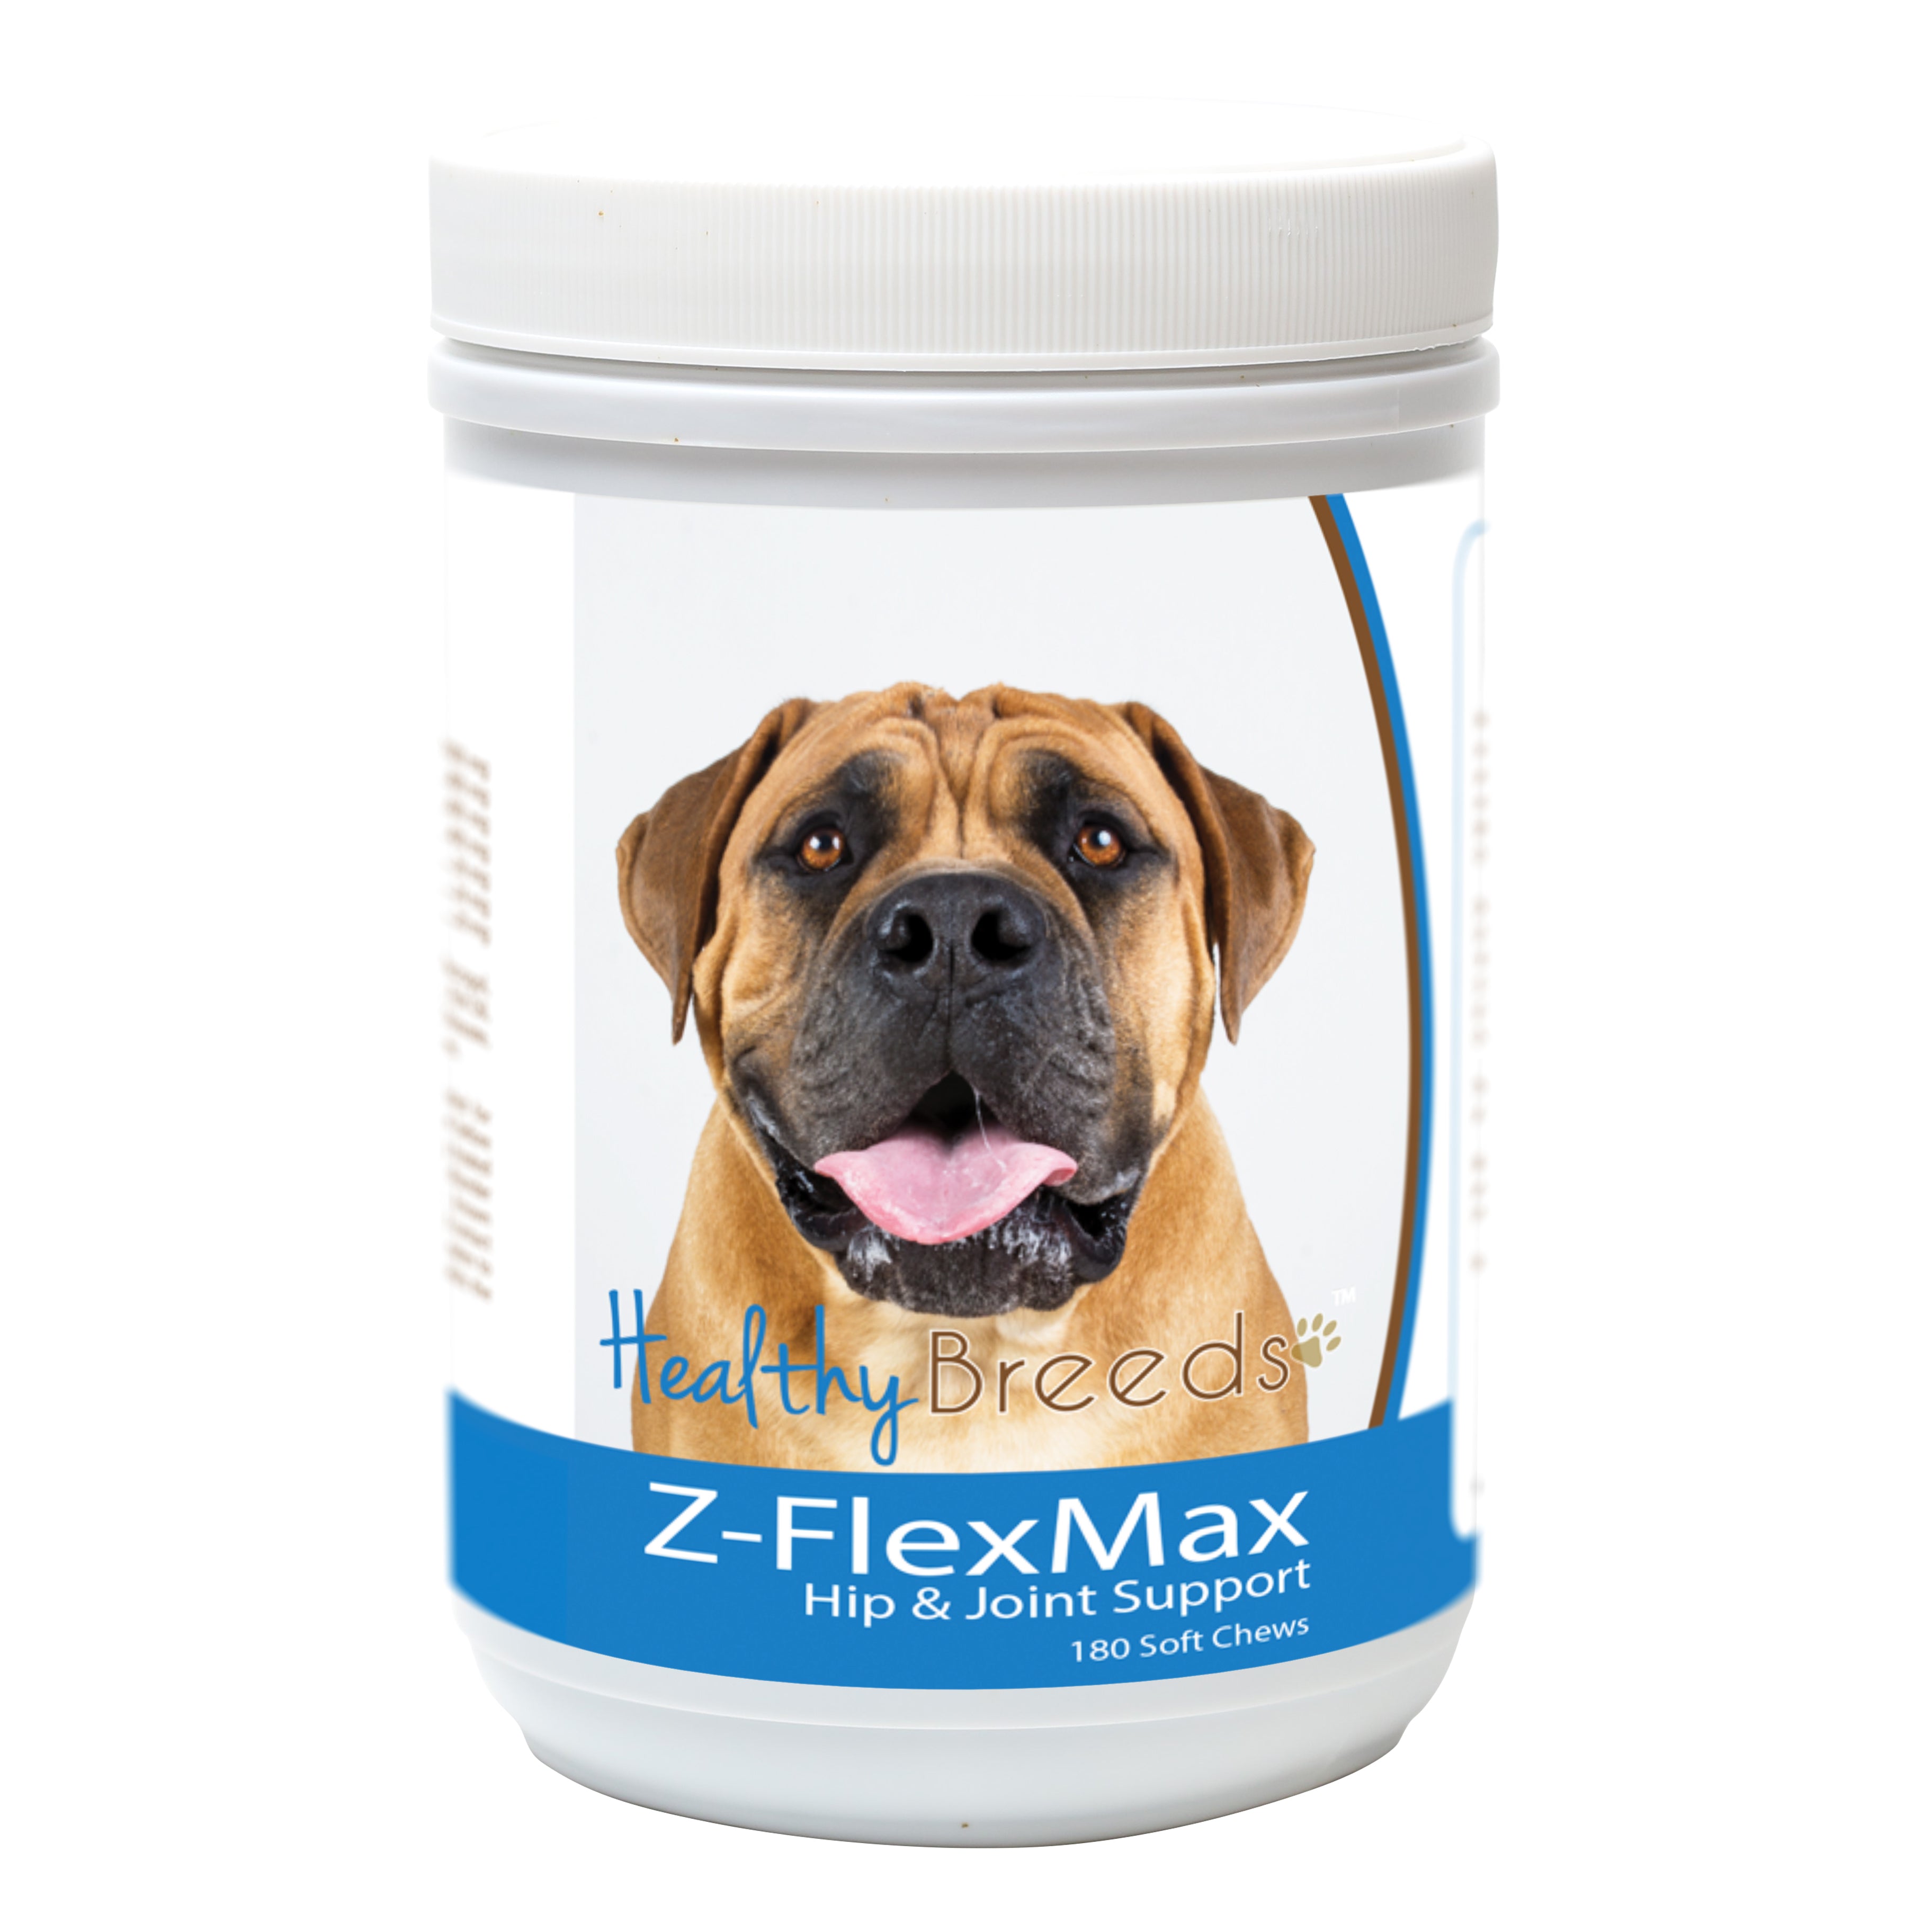 Boerboel Z-Flex Max Dog Hip and Joint Support 180 Count